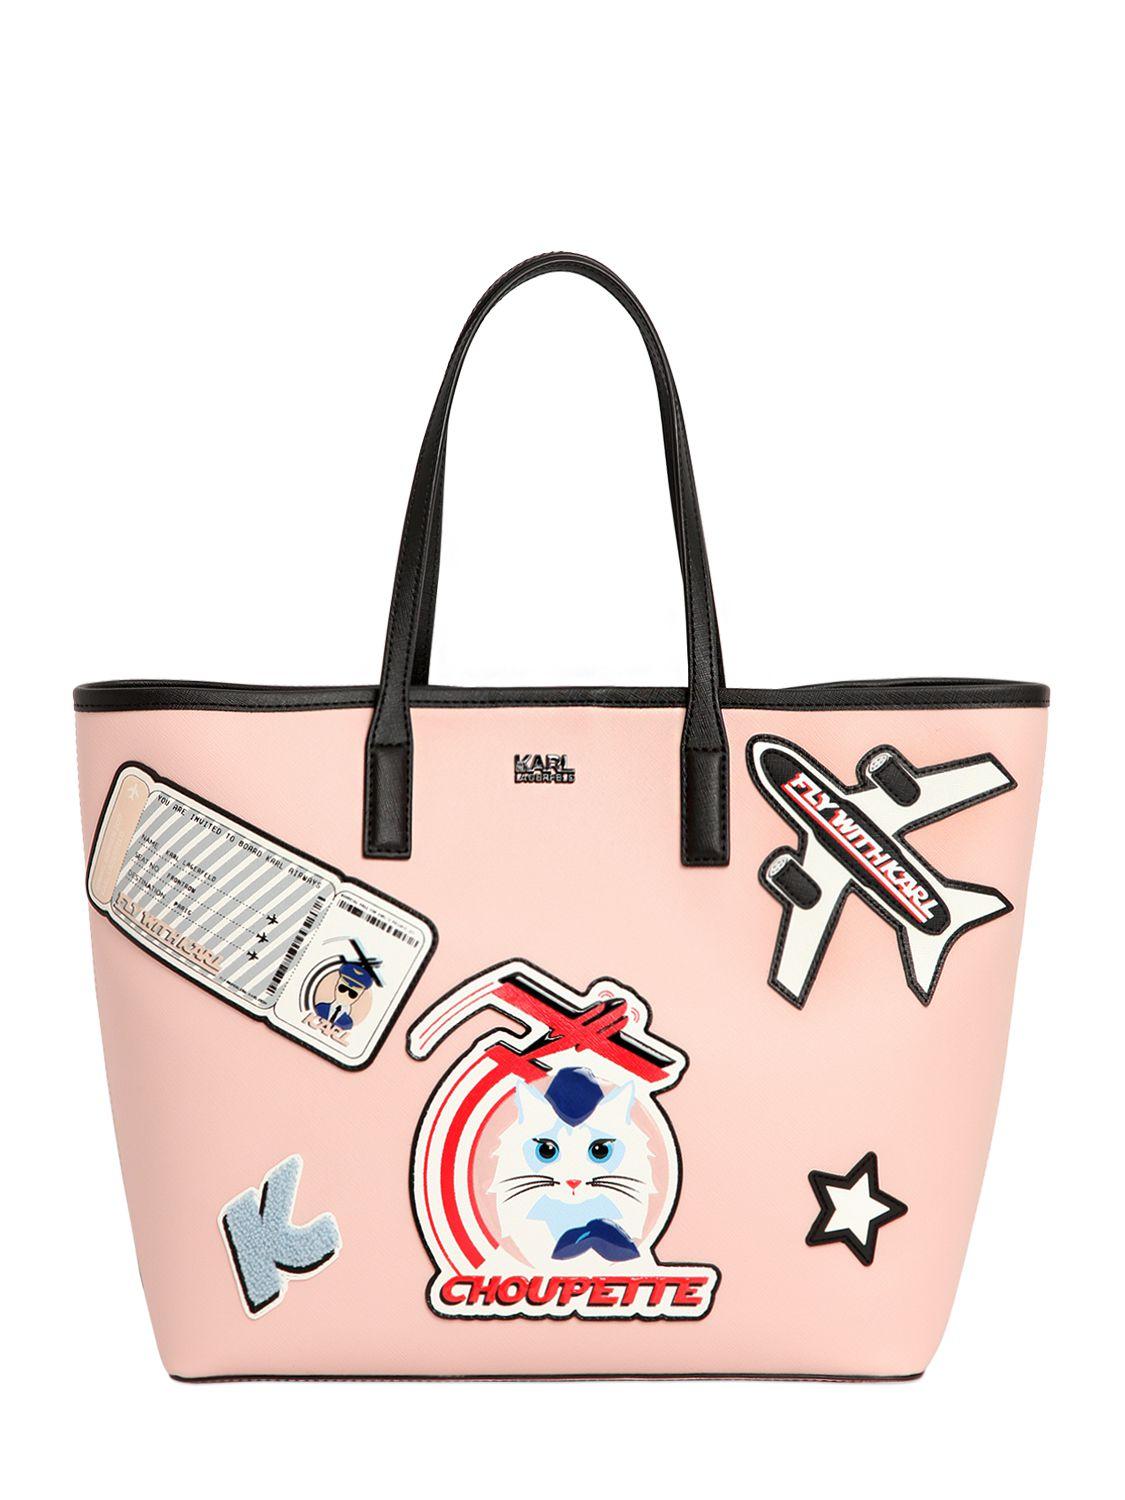 Karl Lagerfeld Jet Fly With Karl Choupette Tote Bag in Light Pink (Pink) -  Lyst